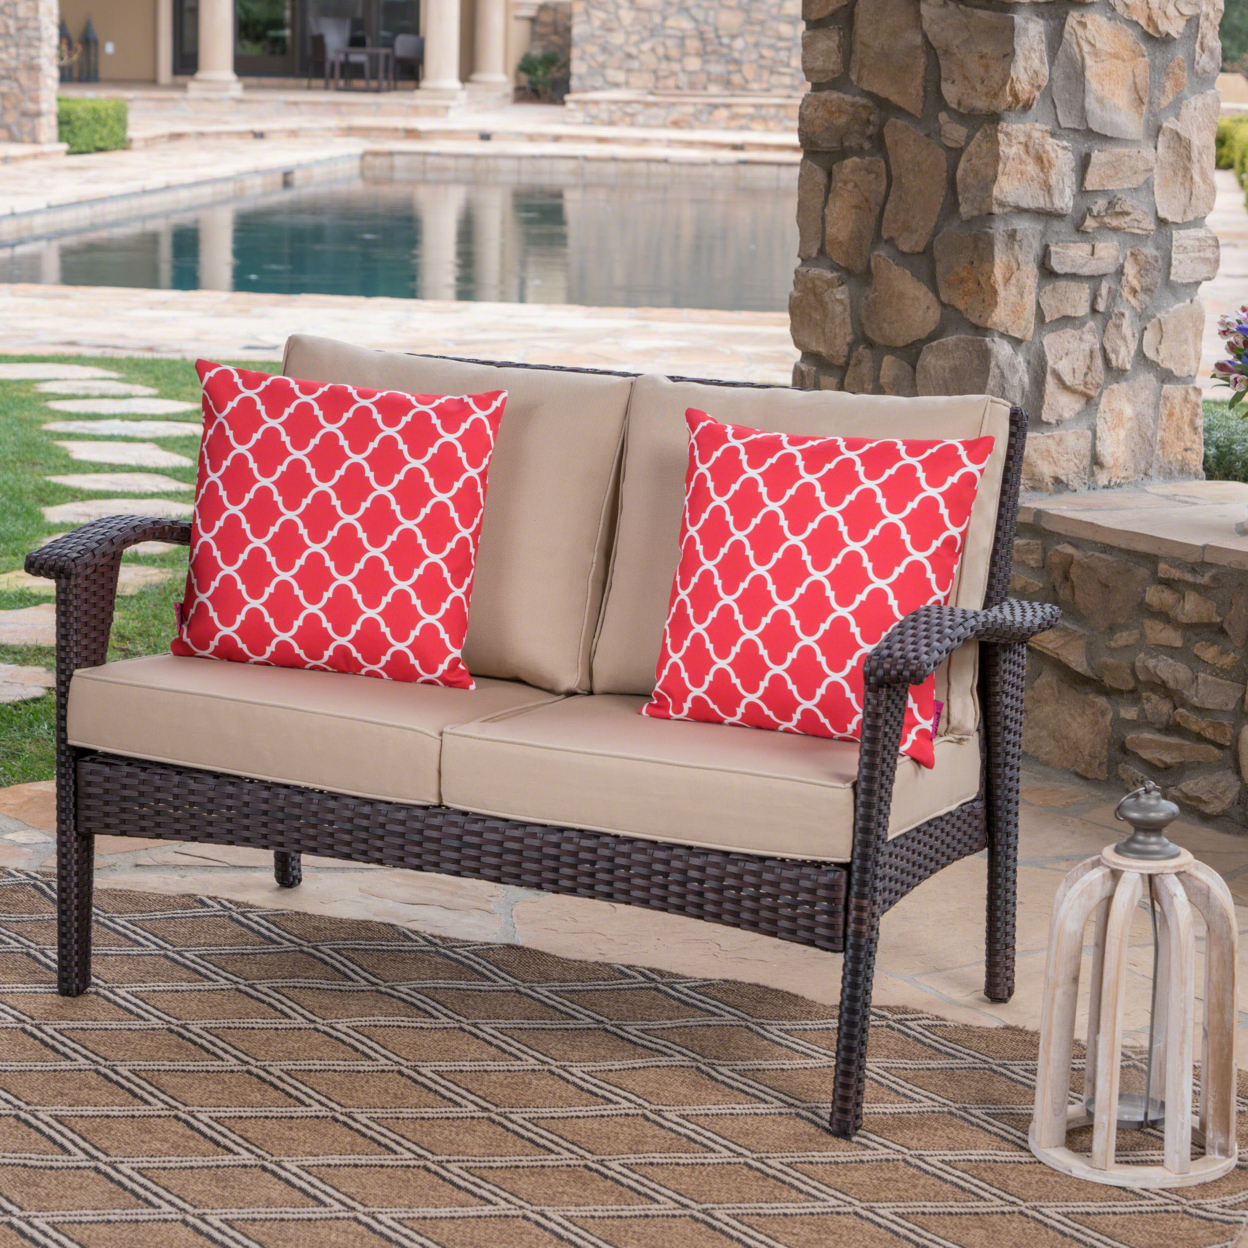 Hilary Outdoor Brown Wicker Loveseat With Water Resistant Cushions - Brown/Tan